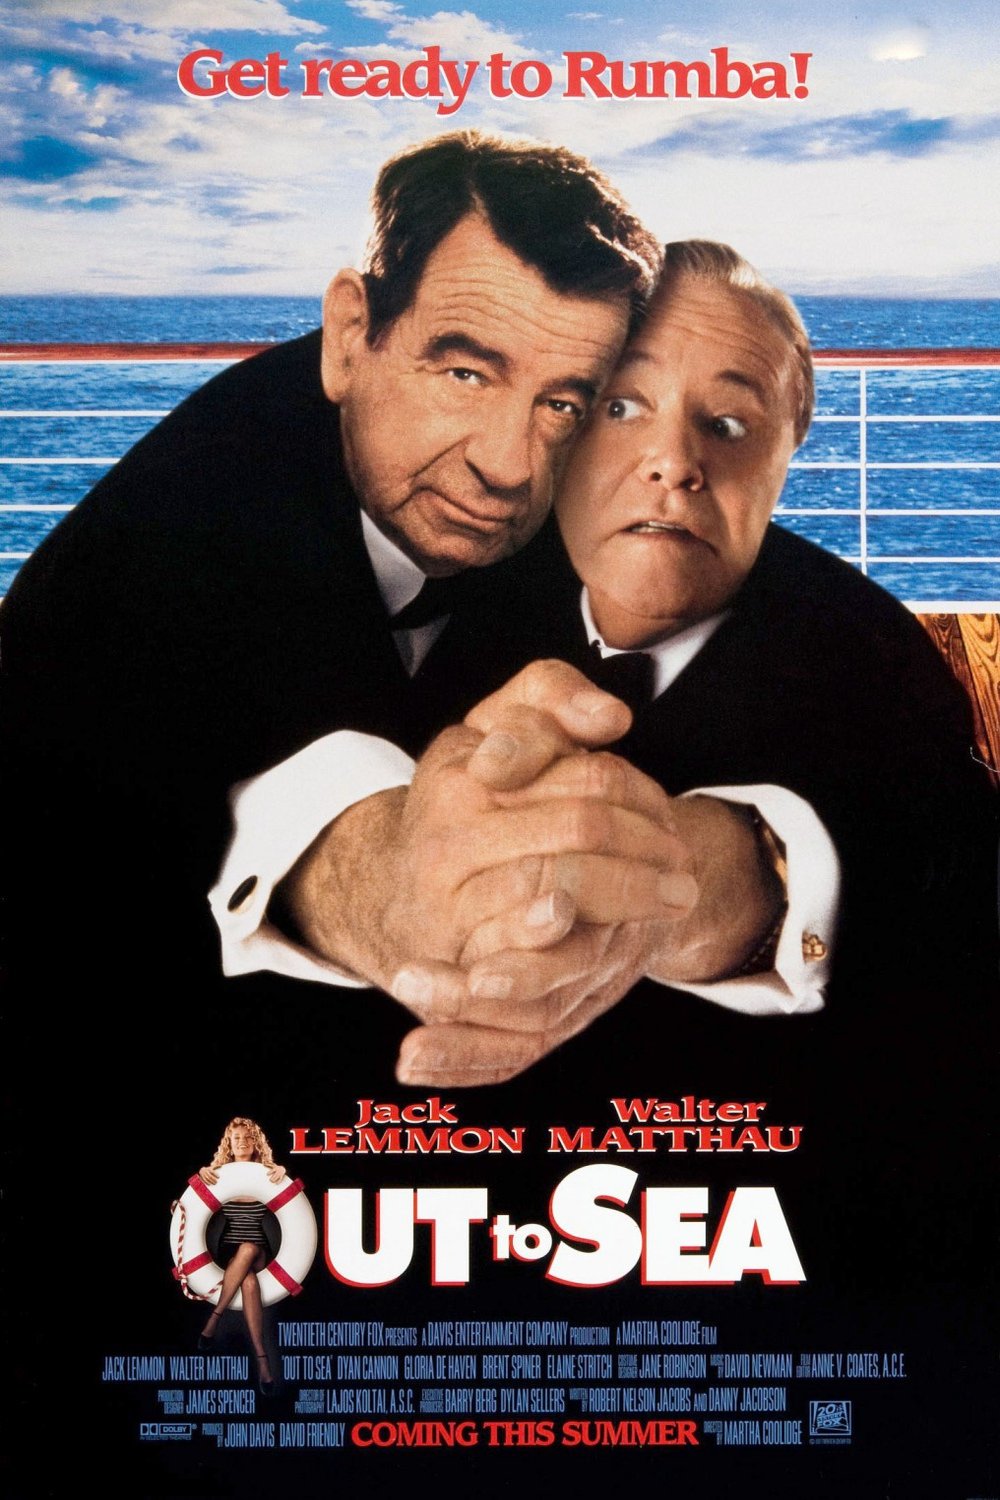 Poster of the movie Out to Sea